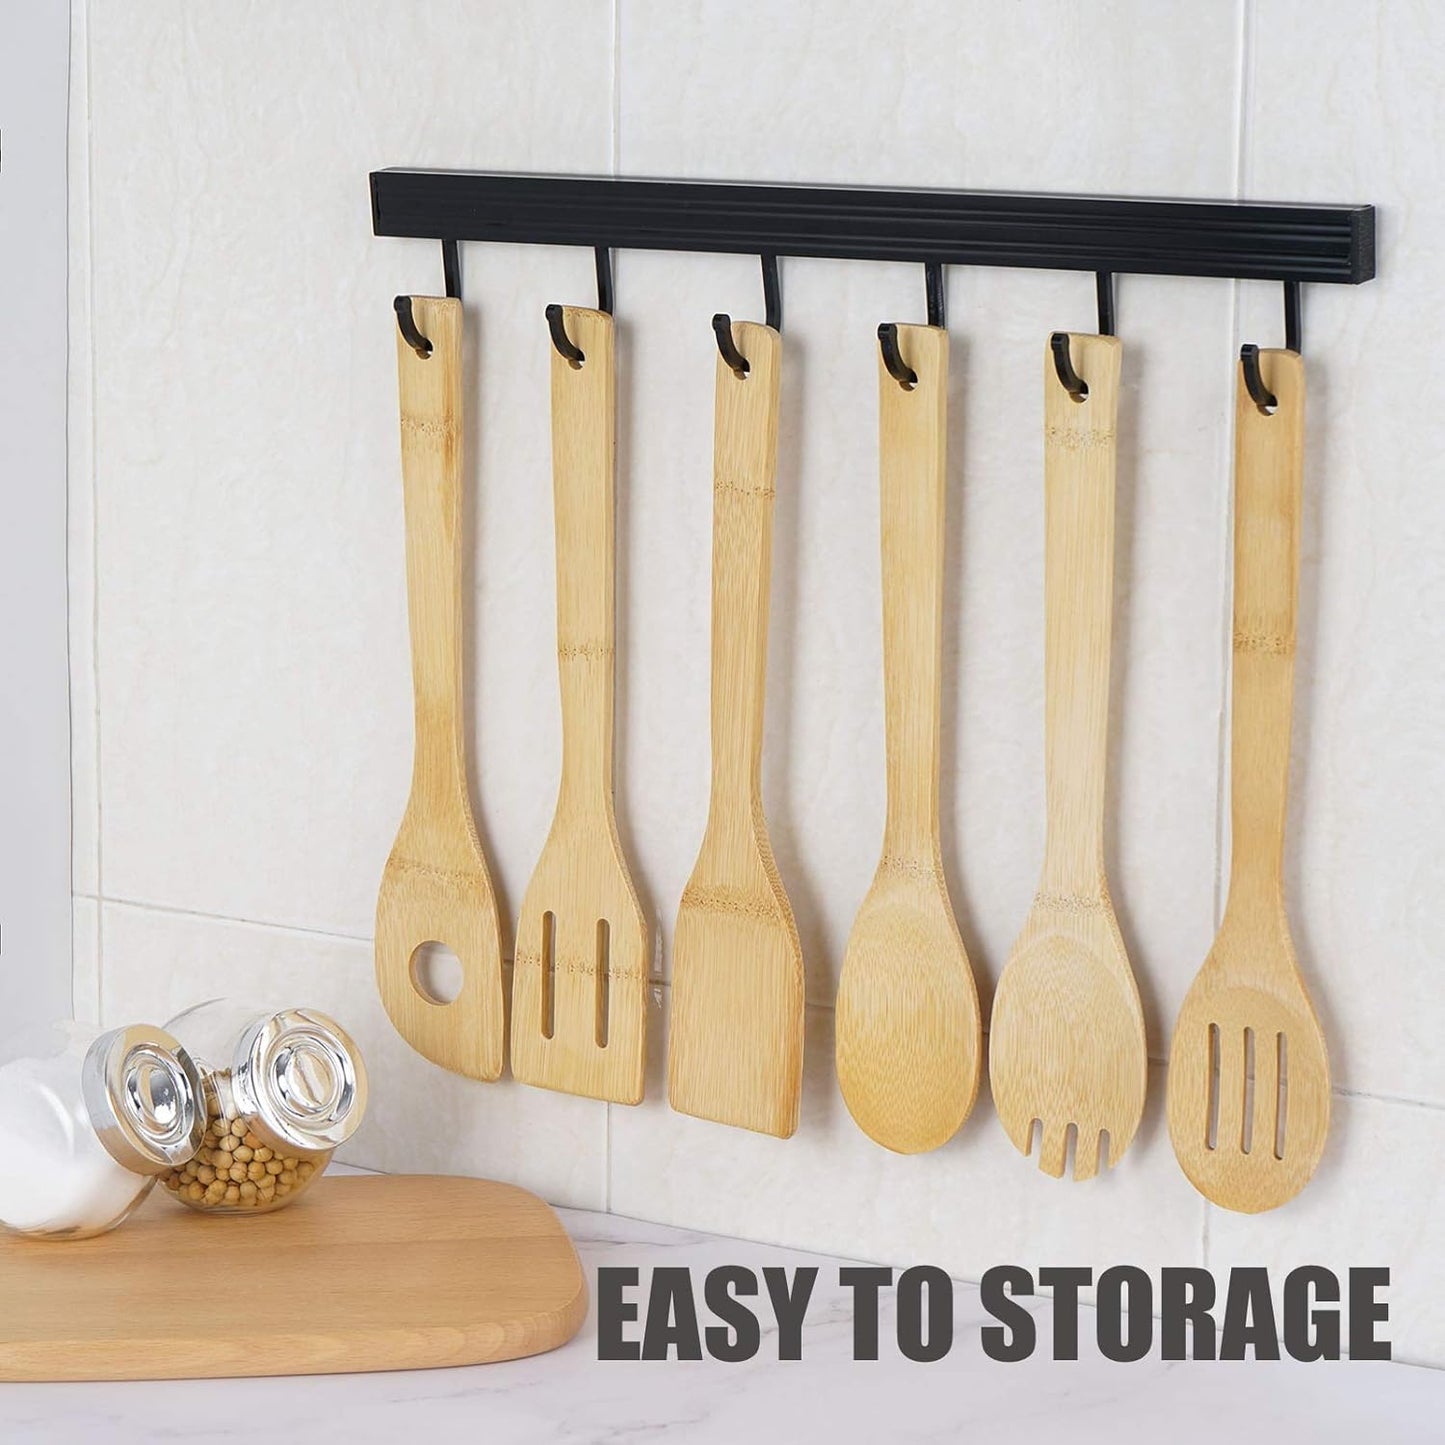 6 Pcs Bamboo Wood Spatula, Durable Heat Resistant Non-Scratch Wooden Kitchen Utensil Set for Nonstick Pots & Pans Everyday Use